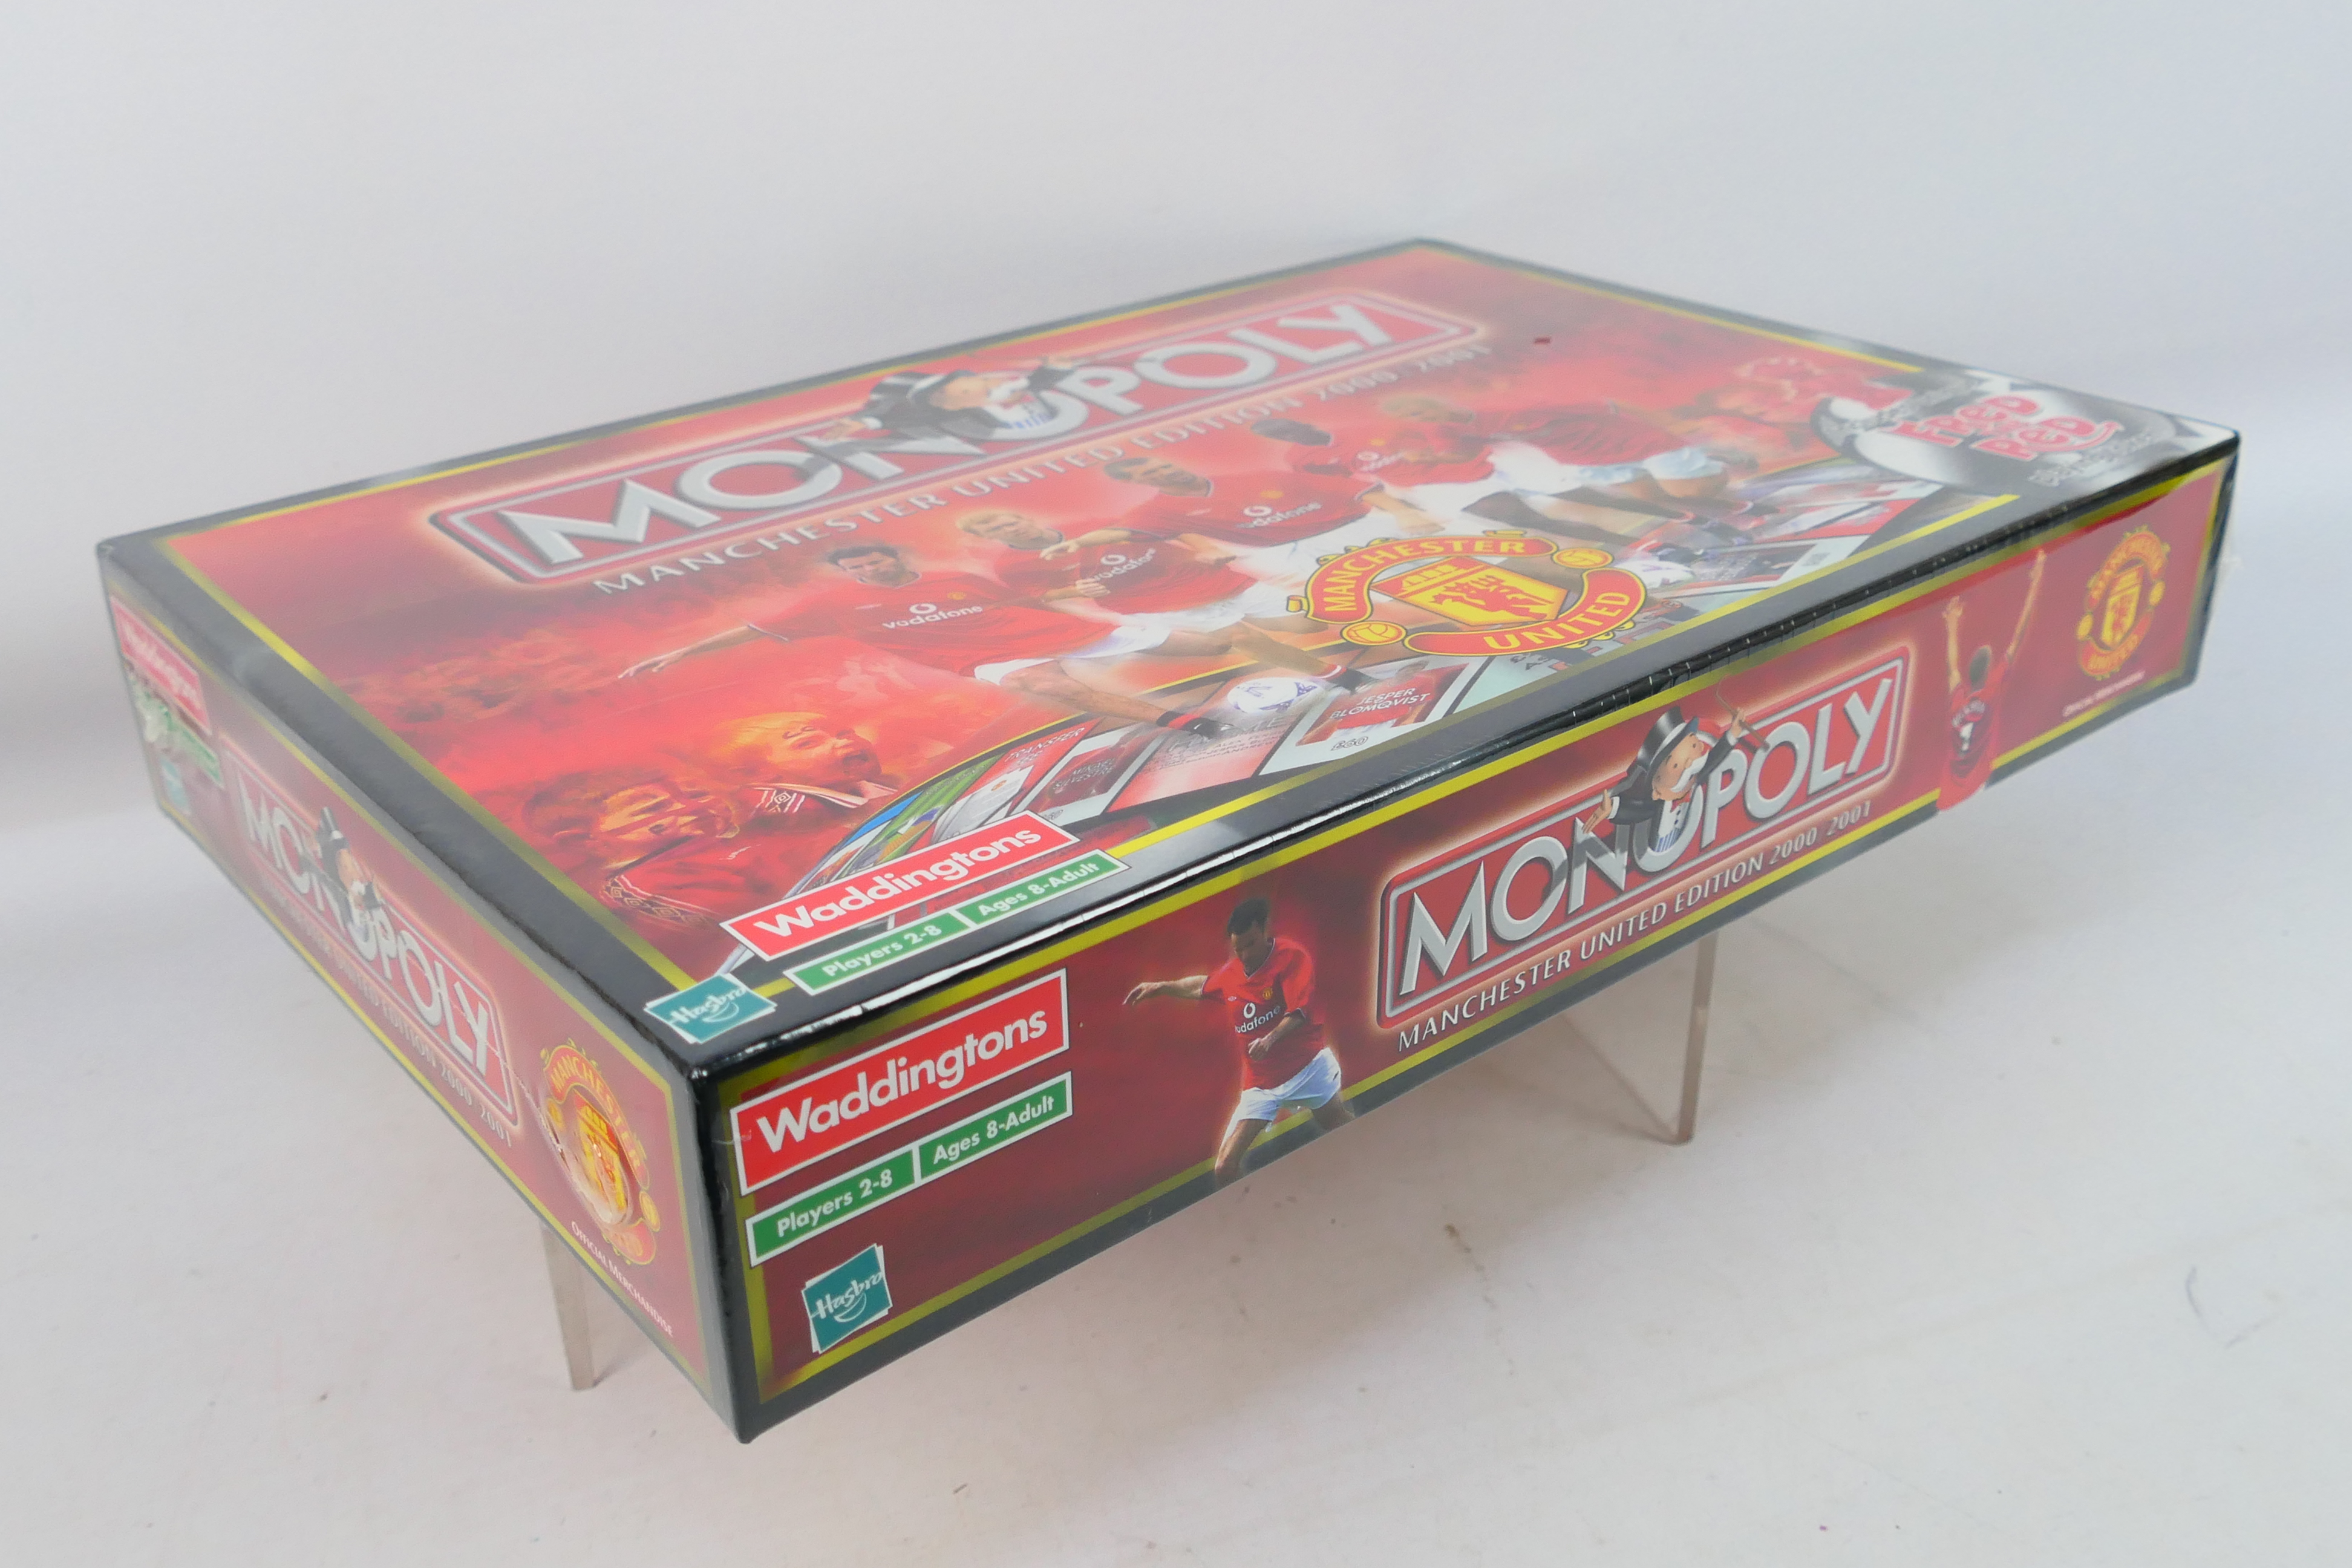 Hasbro - Monopoly - An unopened Manchest - Image 3 of 3